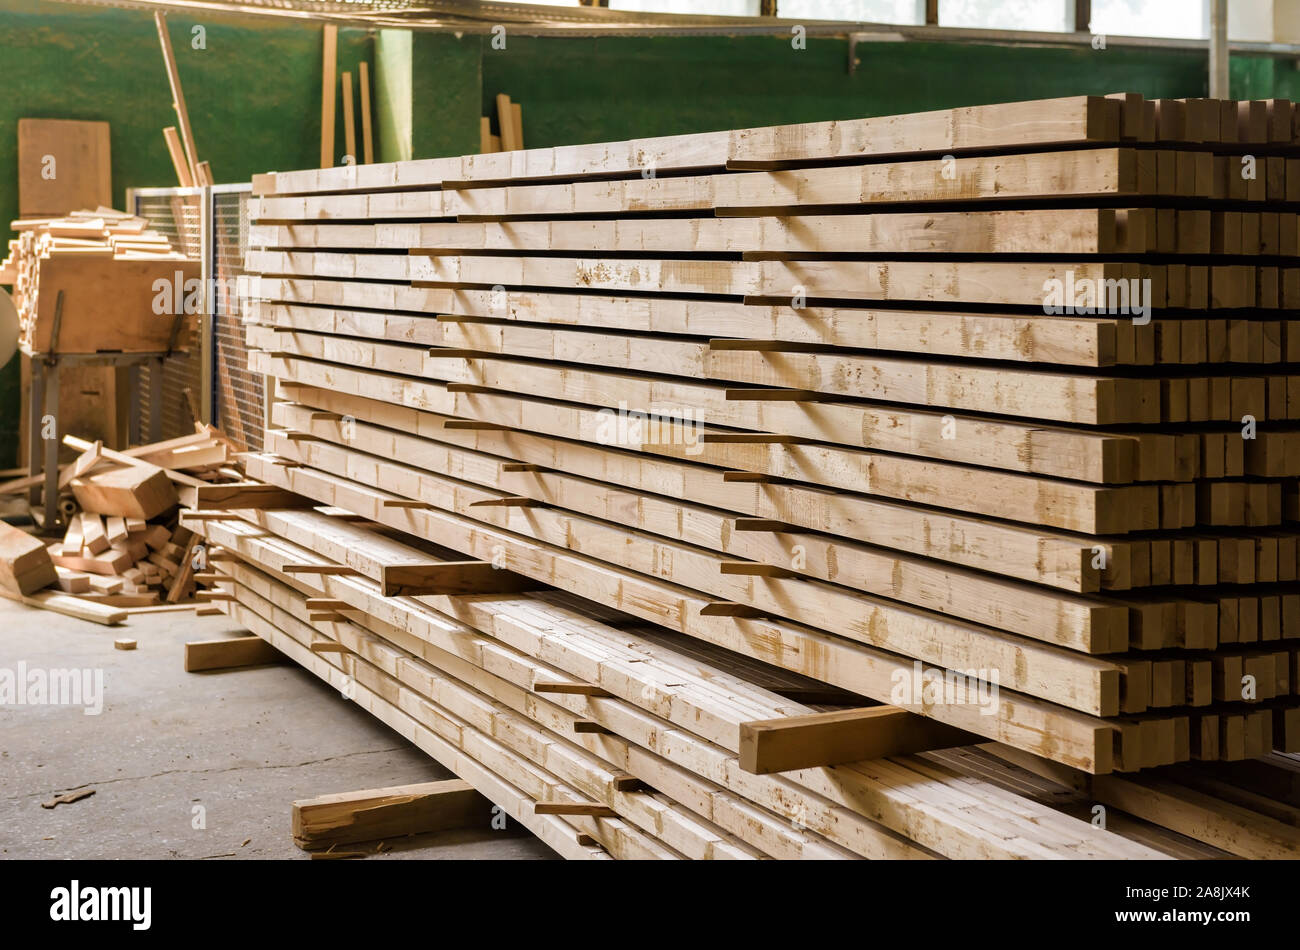 Warehousing and storage of lumber. Boards are stacked by caliber. Stock Photo